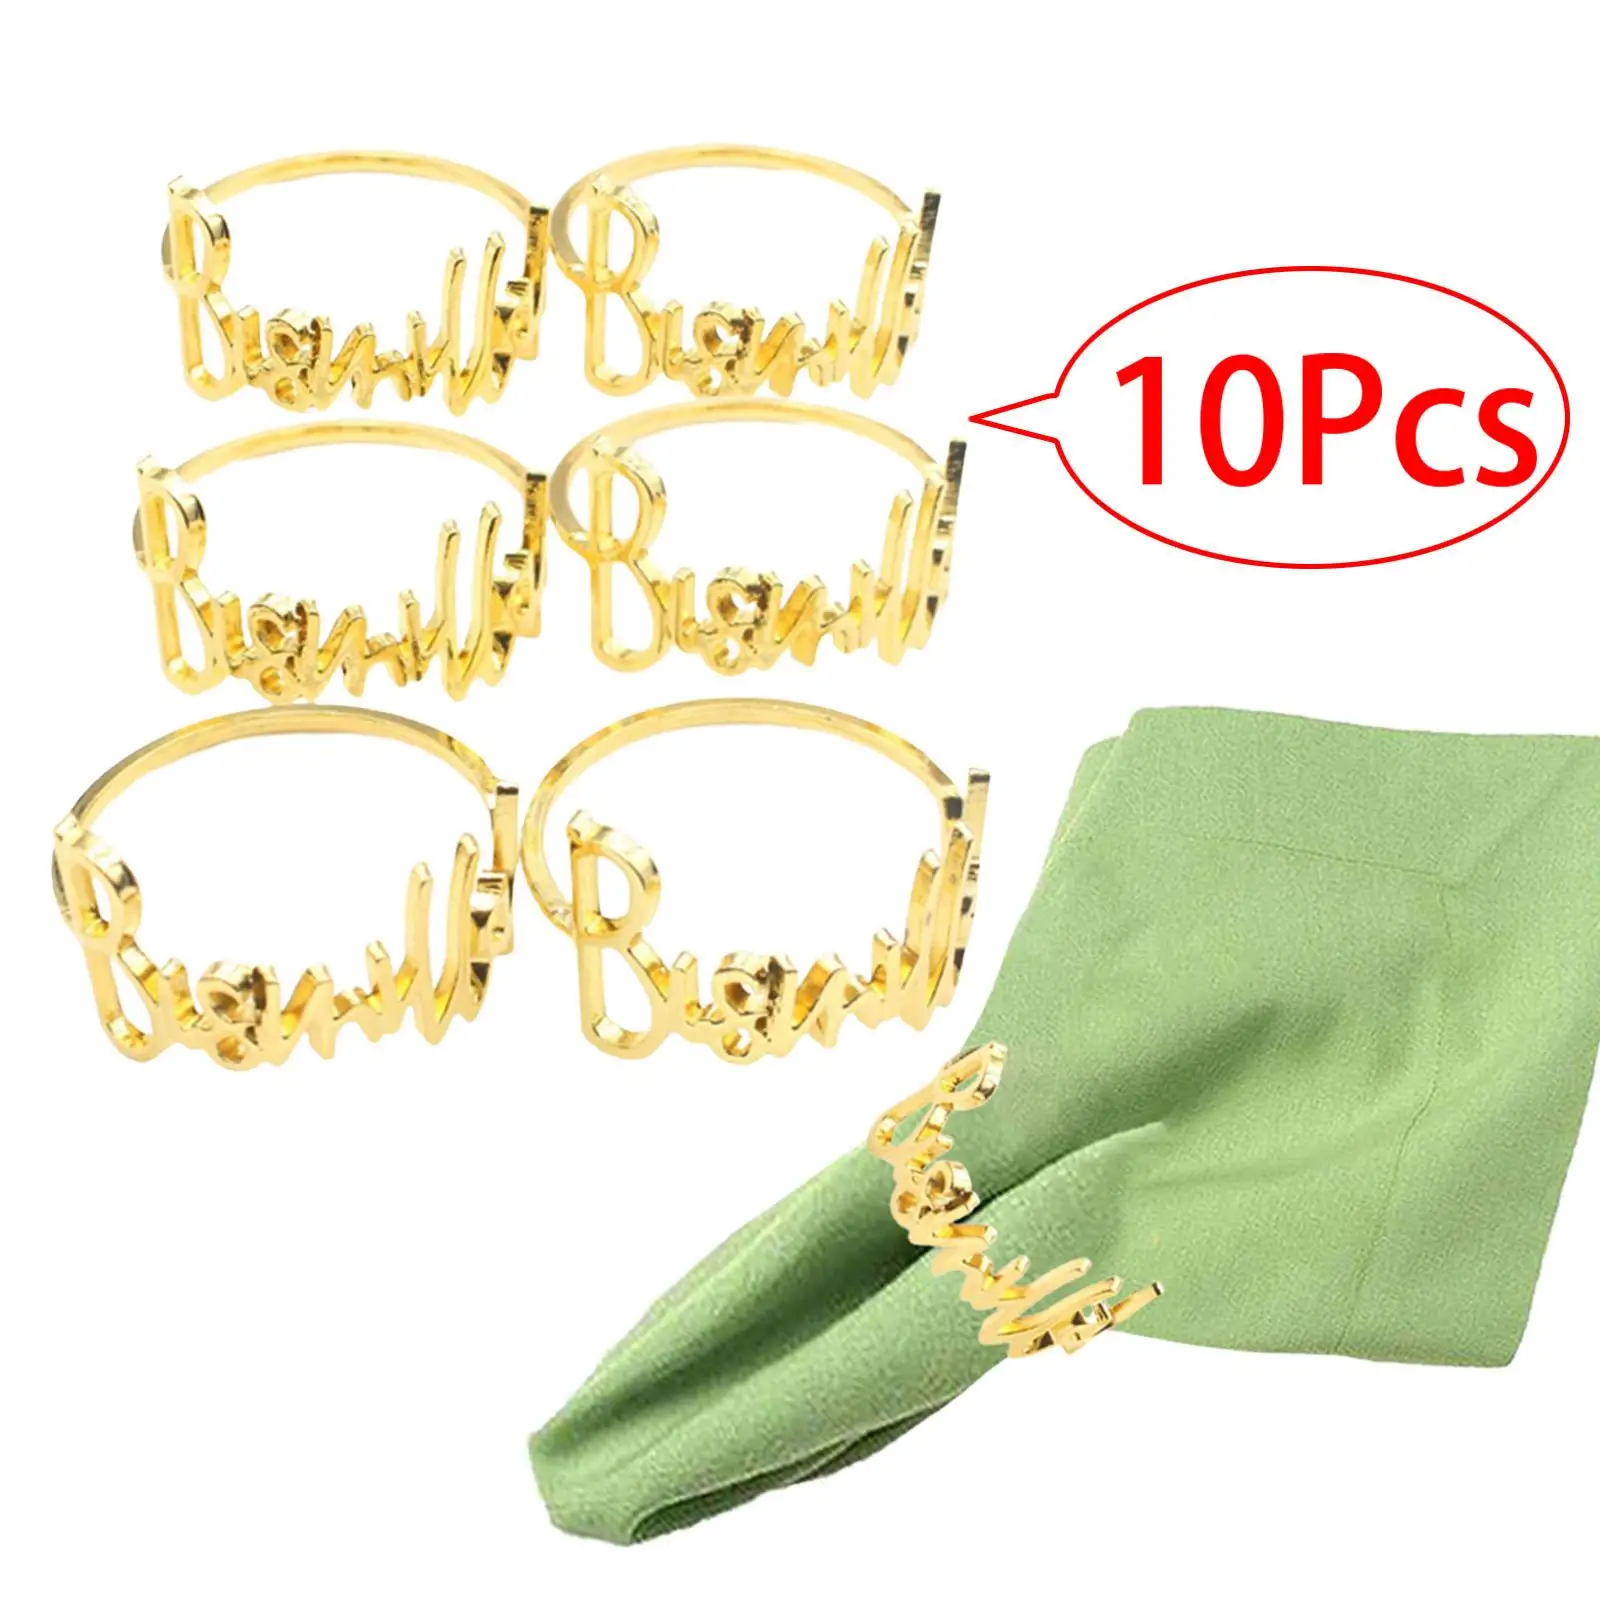 10Pcs Metal Napkin Rings Holder Round Alphabet Napkin Buckles Holder for Table Setting Home Family Gatherings Holiday Accessory